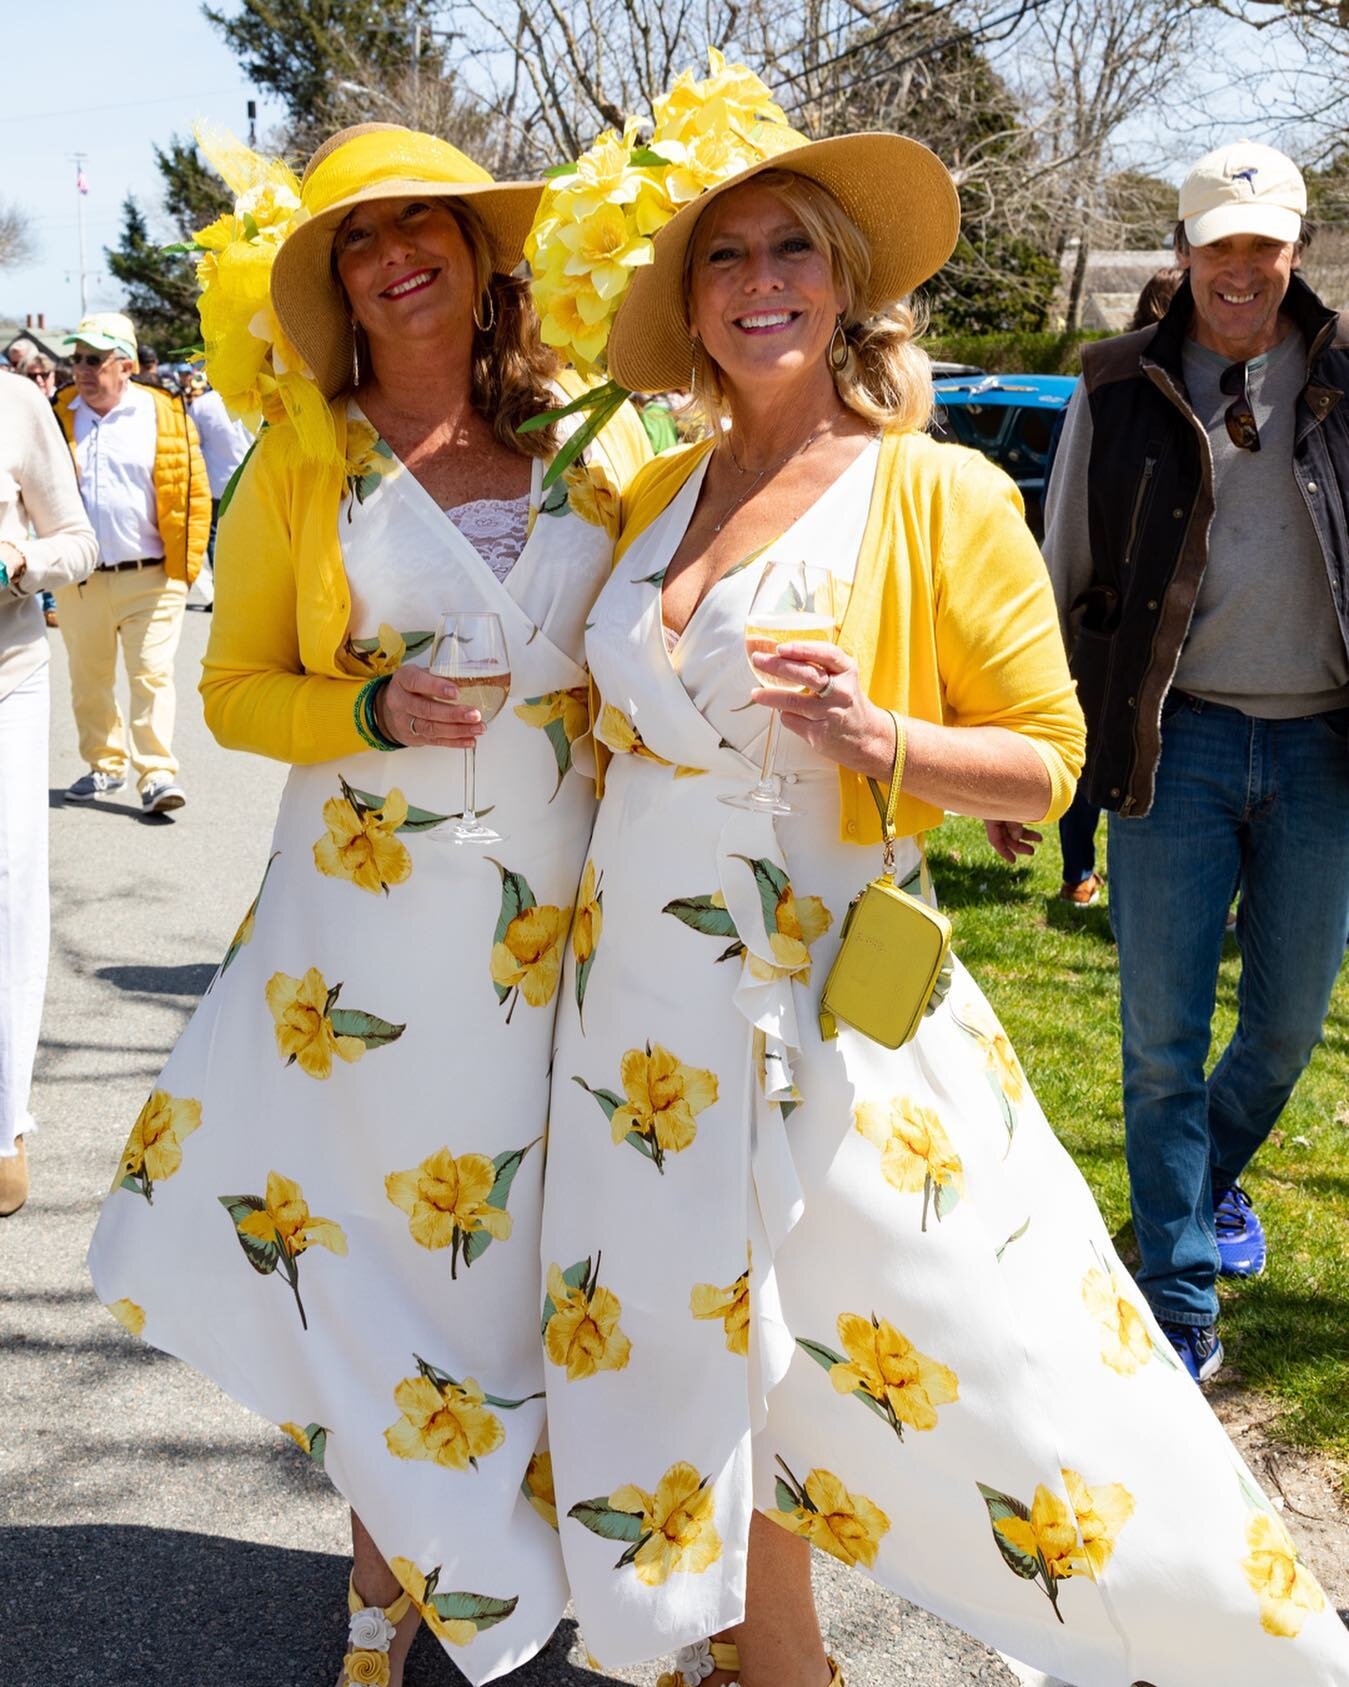 Happy Daffy, Nantucket! 🌼 🎉 We are so excited to see everyone out and about all weekend long. 

Don't forget to be on the lookout for the upcoming NAT edition in your inbox this Tuesday. This special edition will have ALL of the images from this ye